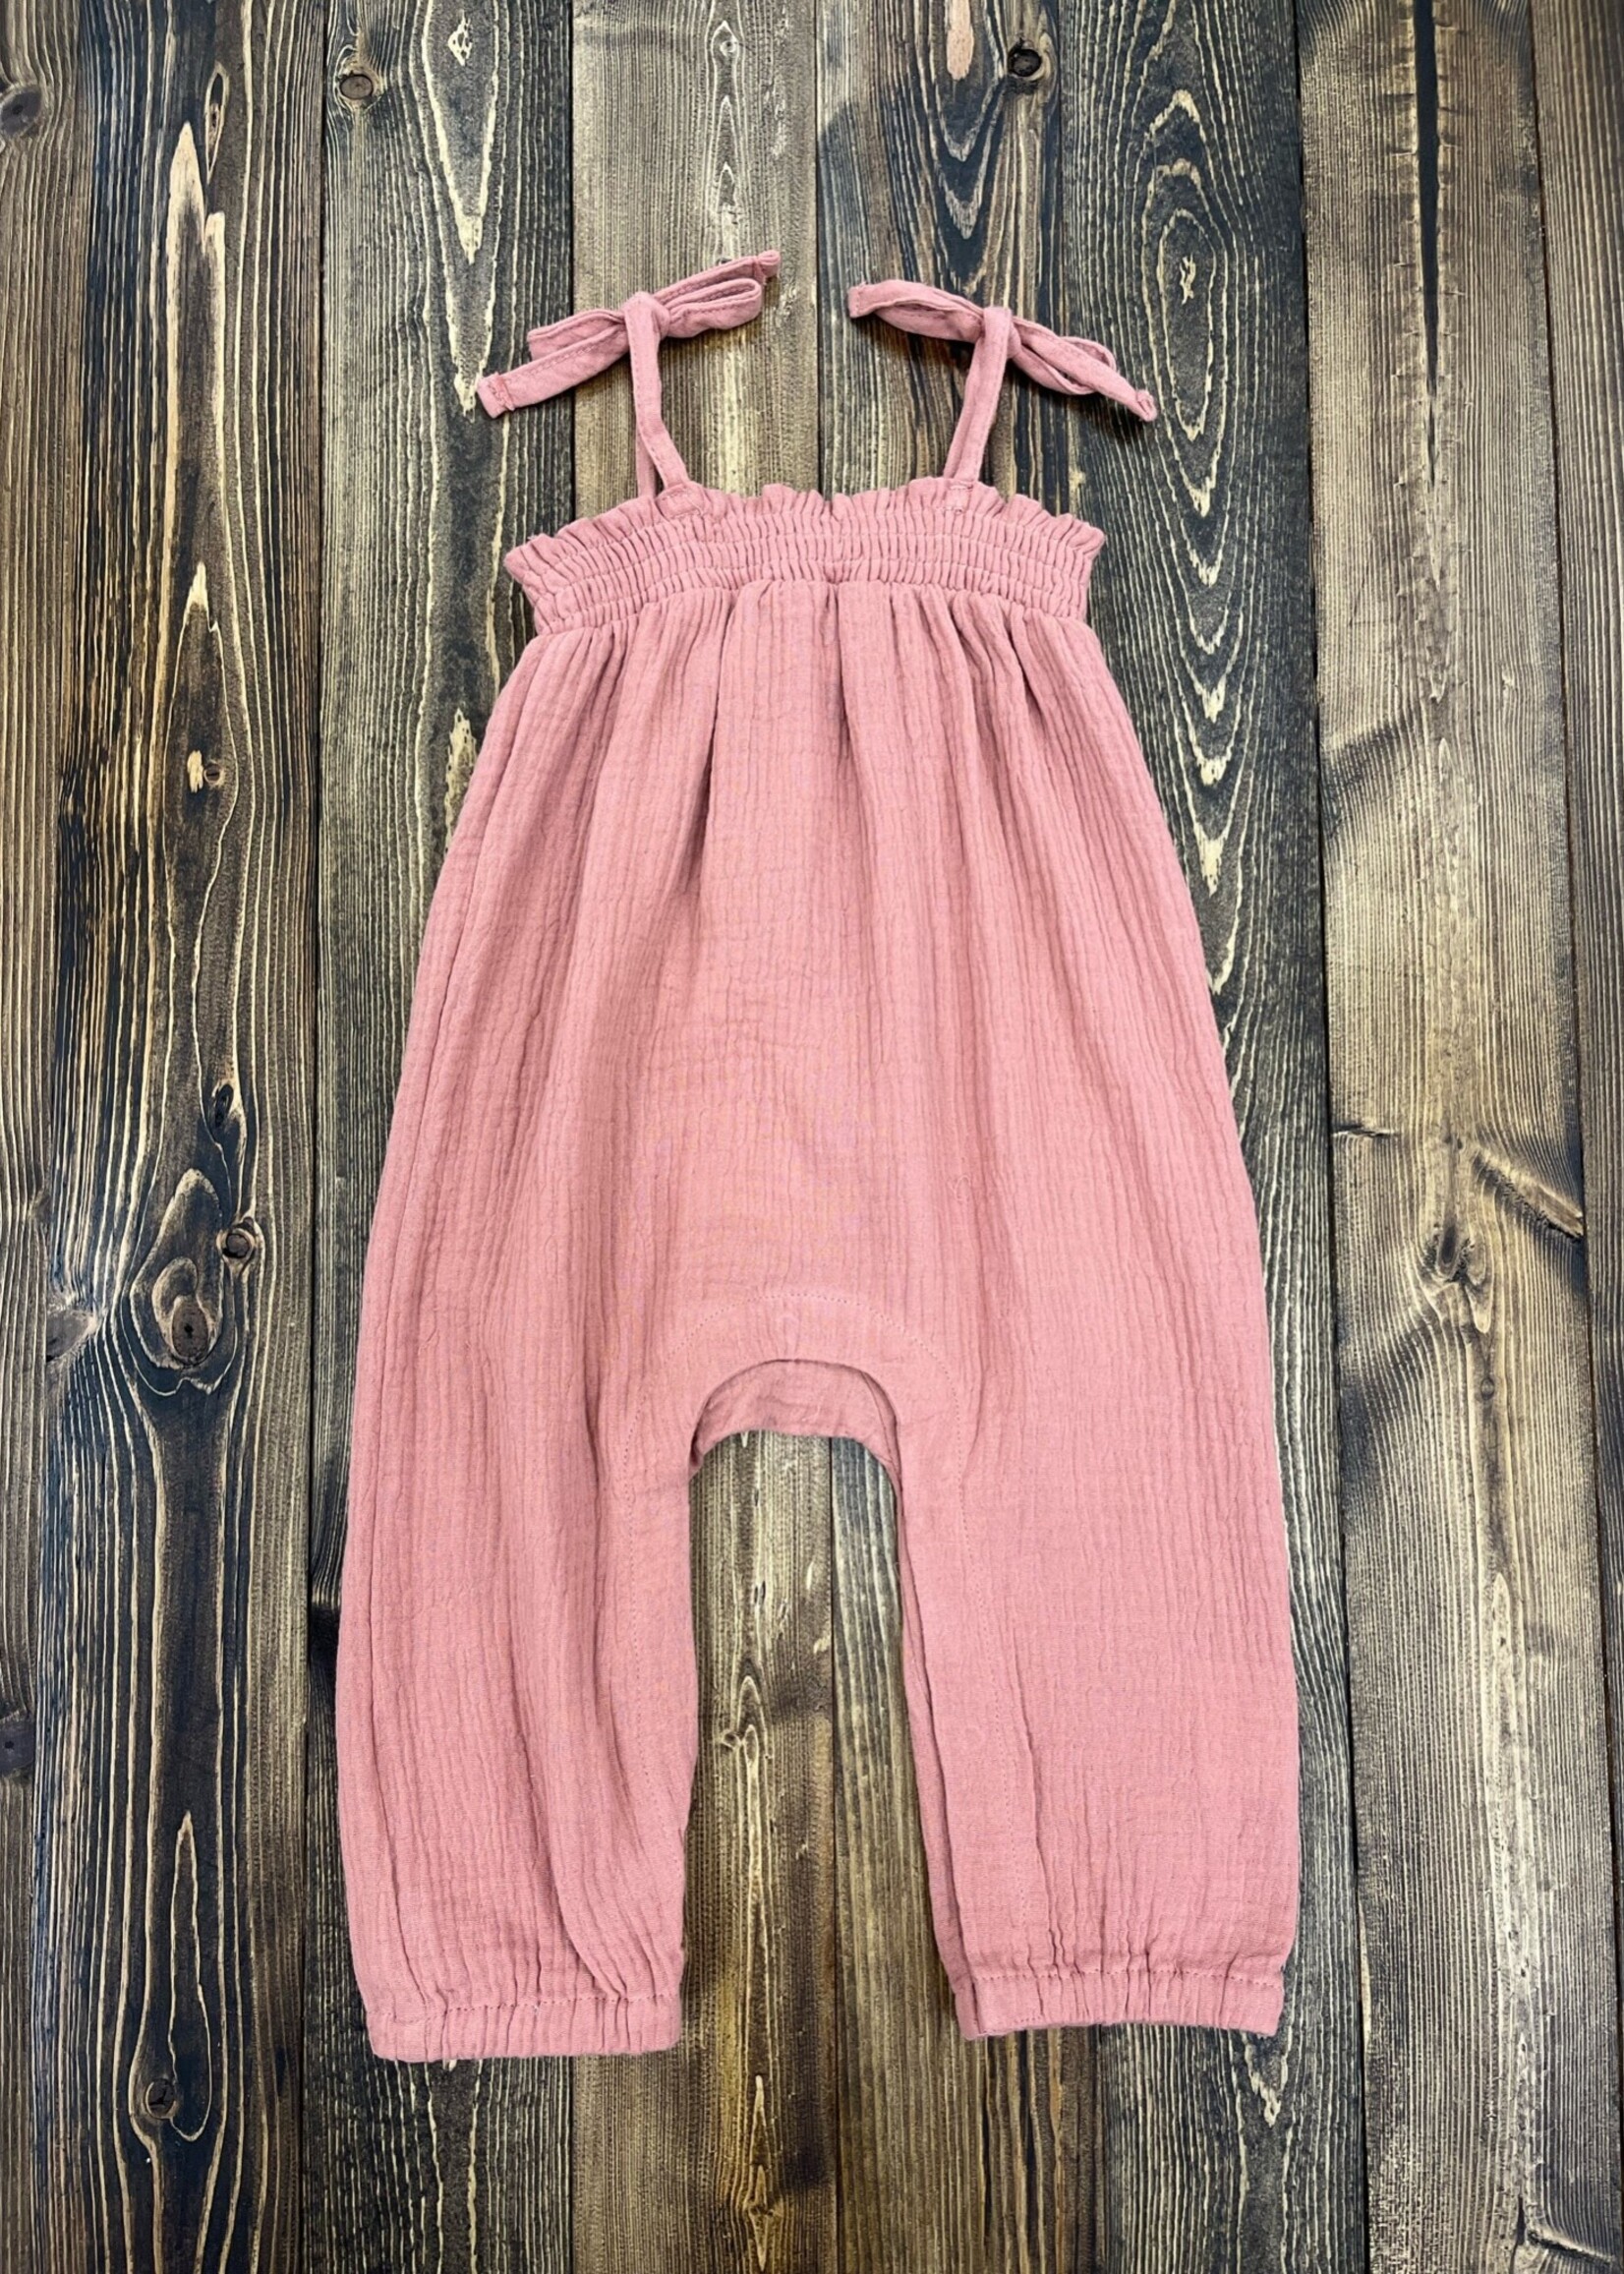 Baby Sprouts Sweet and Sassy Romper - Dusty Rose